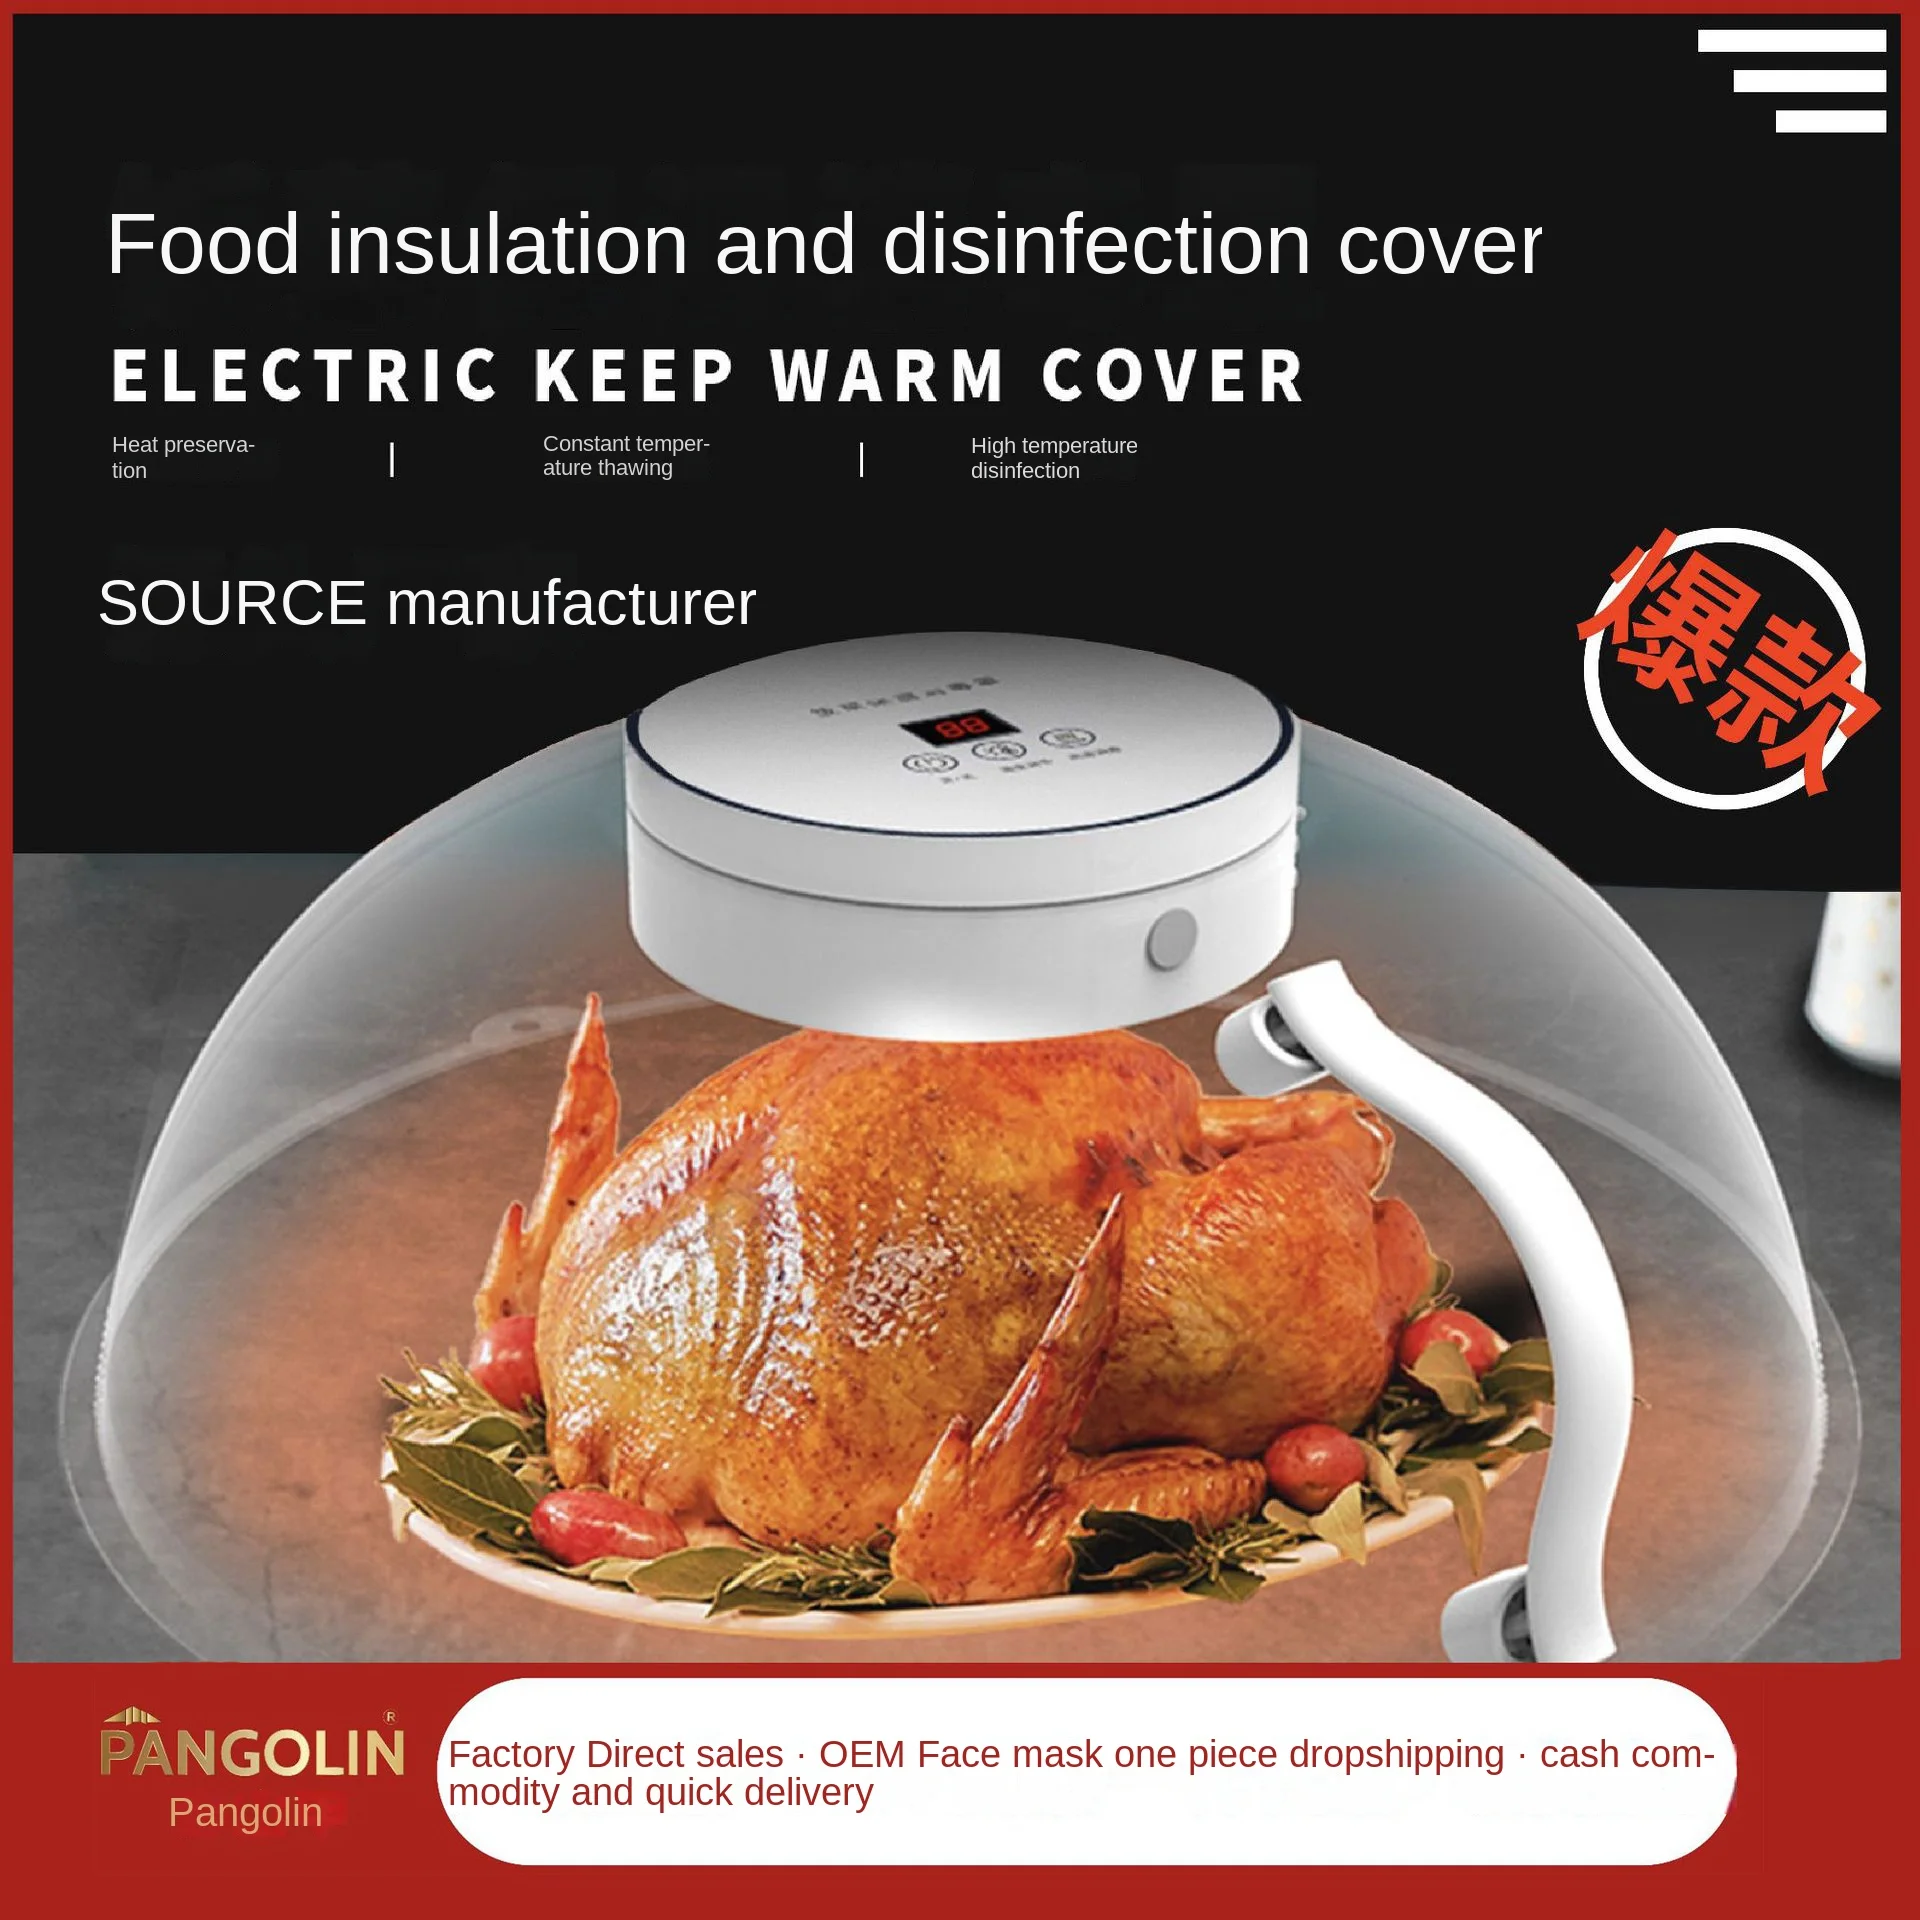 

Heating Sealing Cover for Food Meal Intelligent Smart Electric Heating Food Insulation Cover Multi-Function Food Fresh Cover